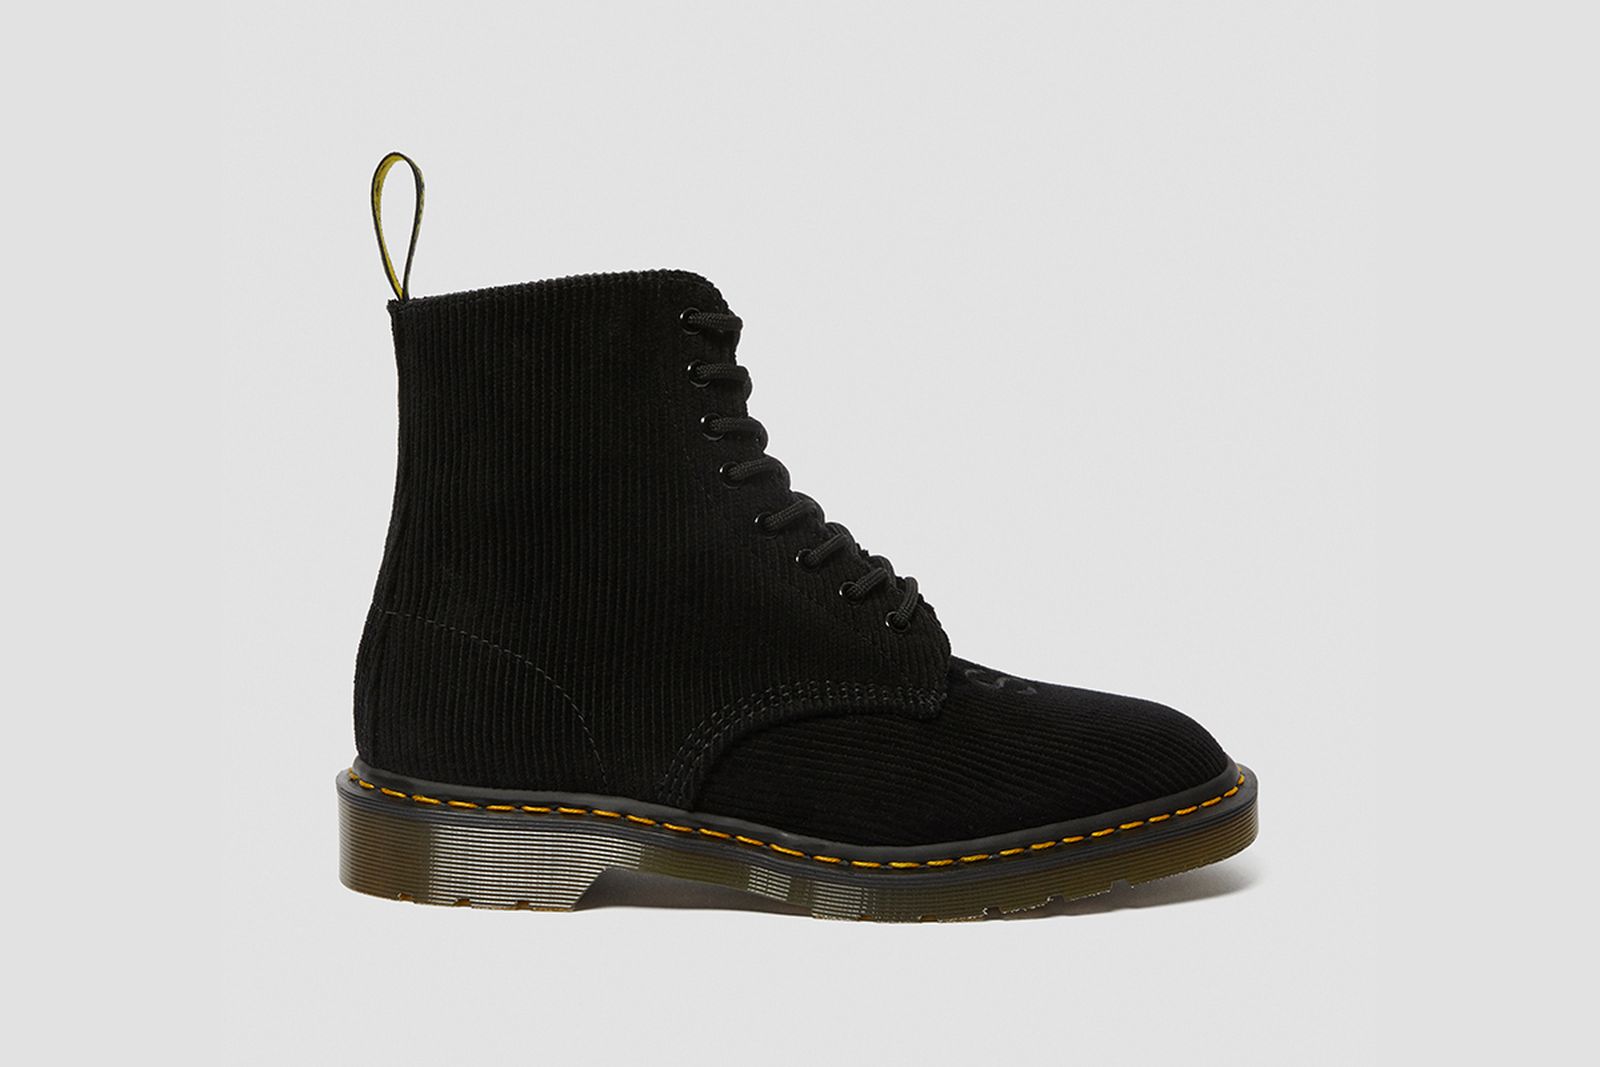 undercover-dr-martens-1460-release-date-price-08